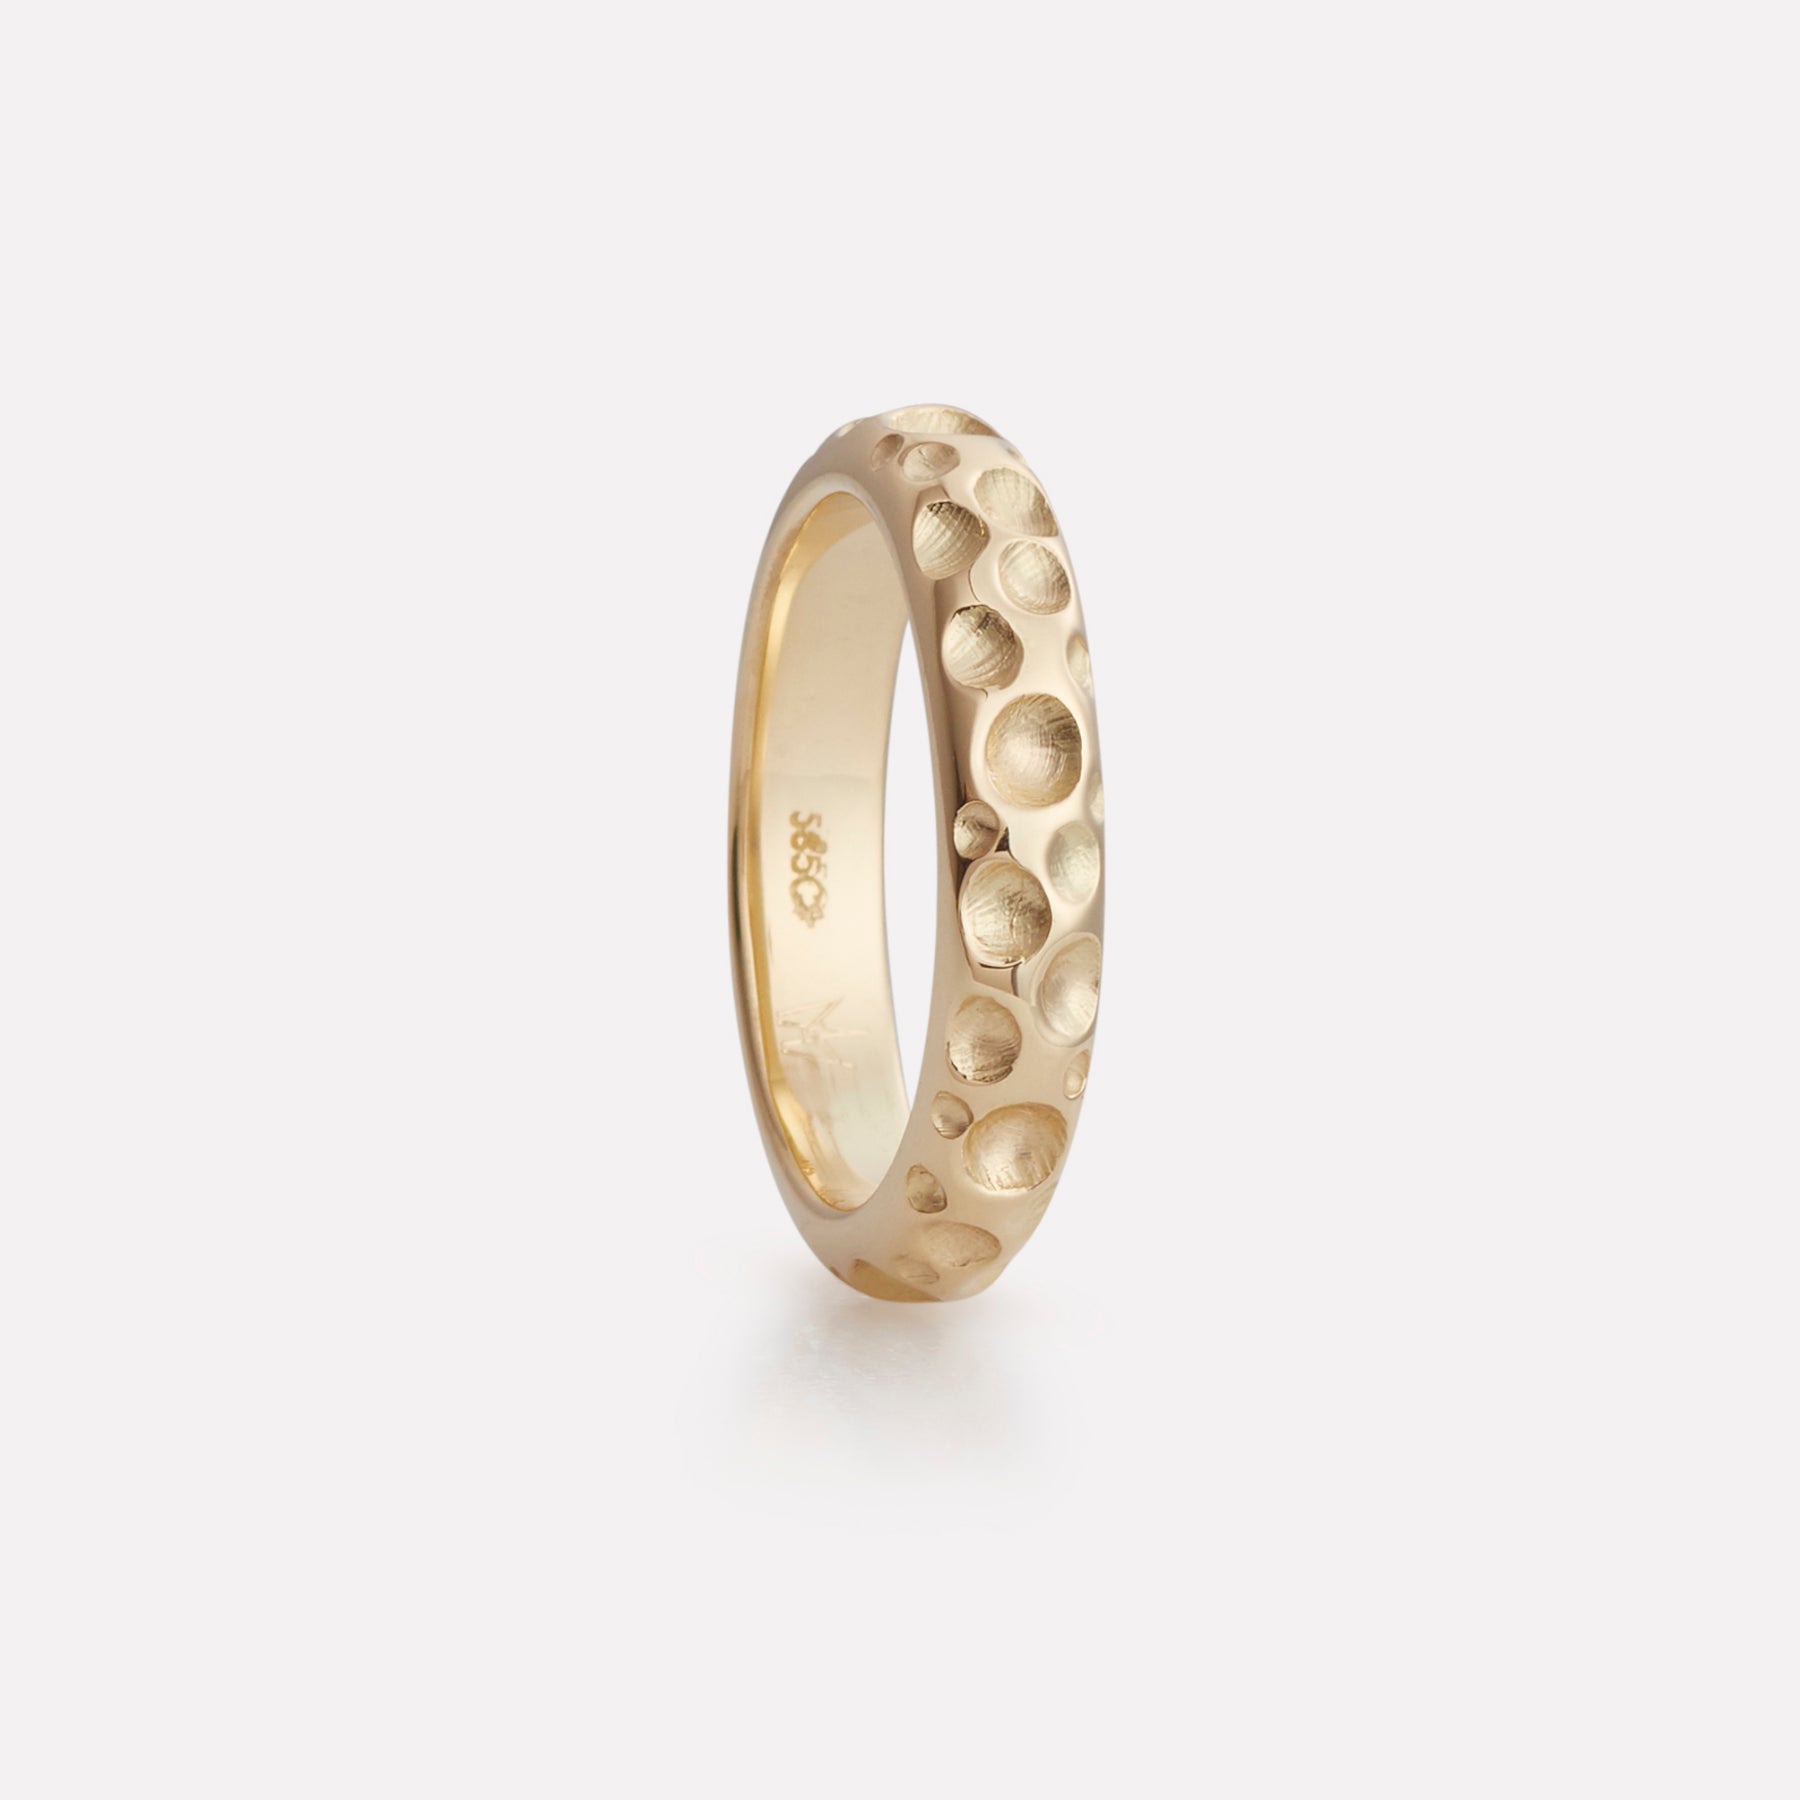 Bubble ring in yellow gold, ladies